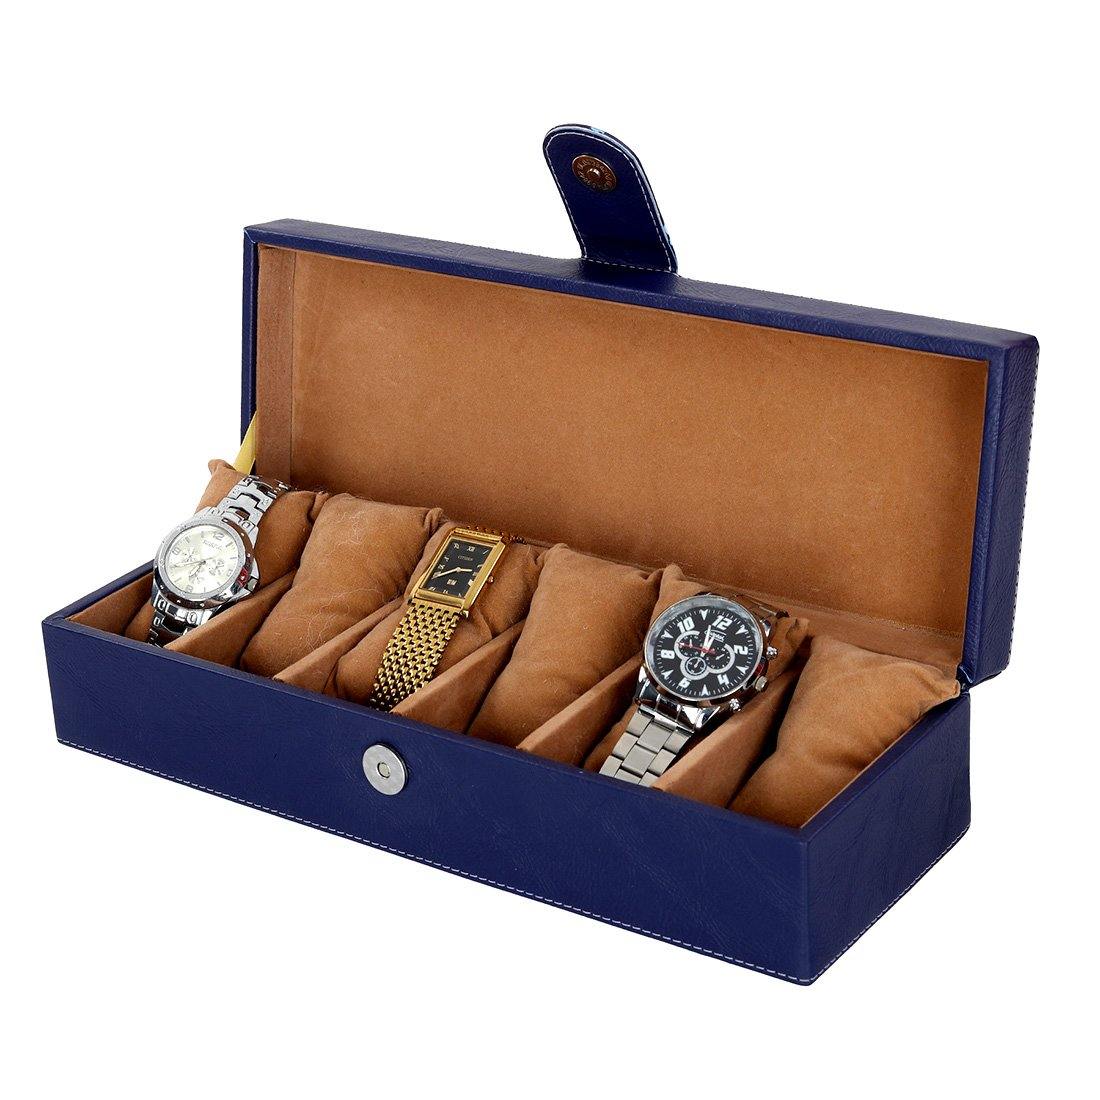 BAGAHOLICBOY SHOPS: Travel In Style With These 5 Watch Cases - BAGAHOLICBOY